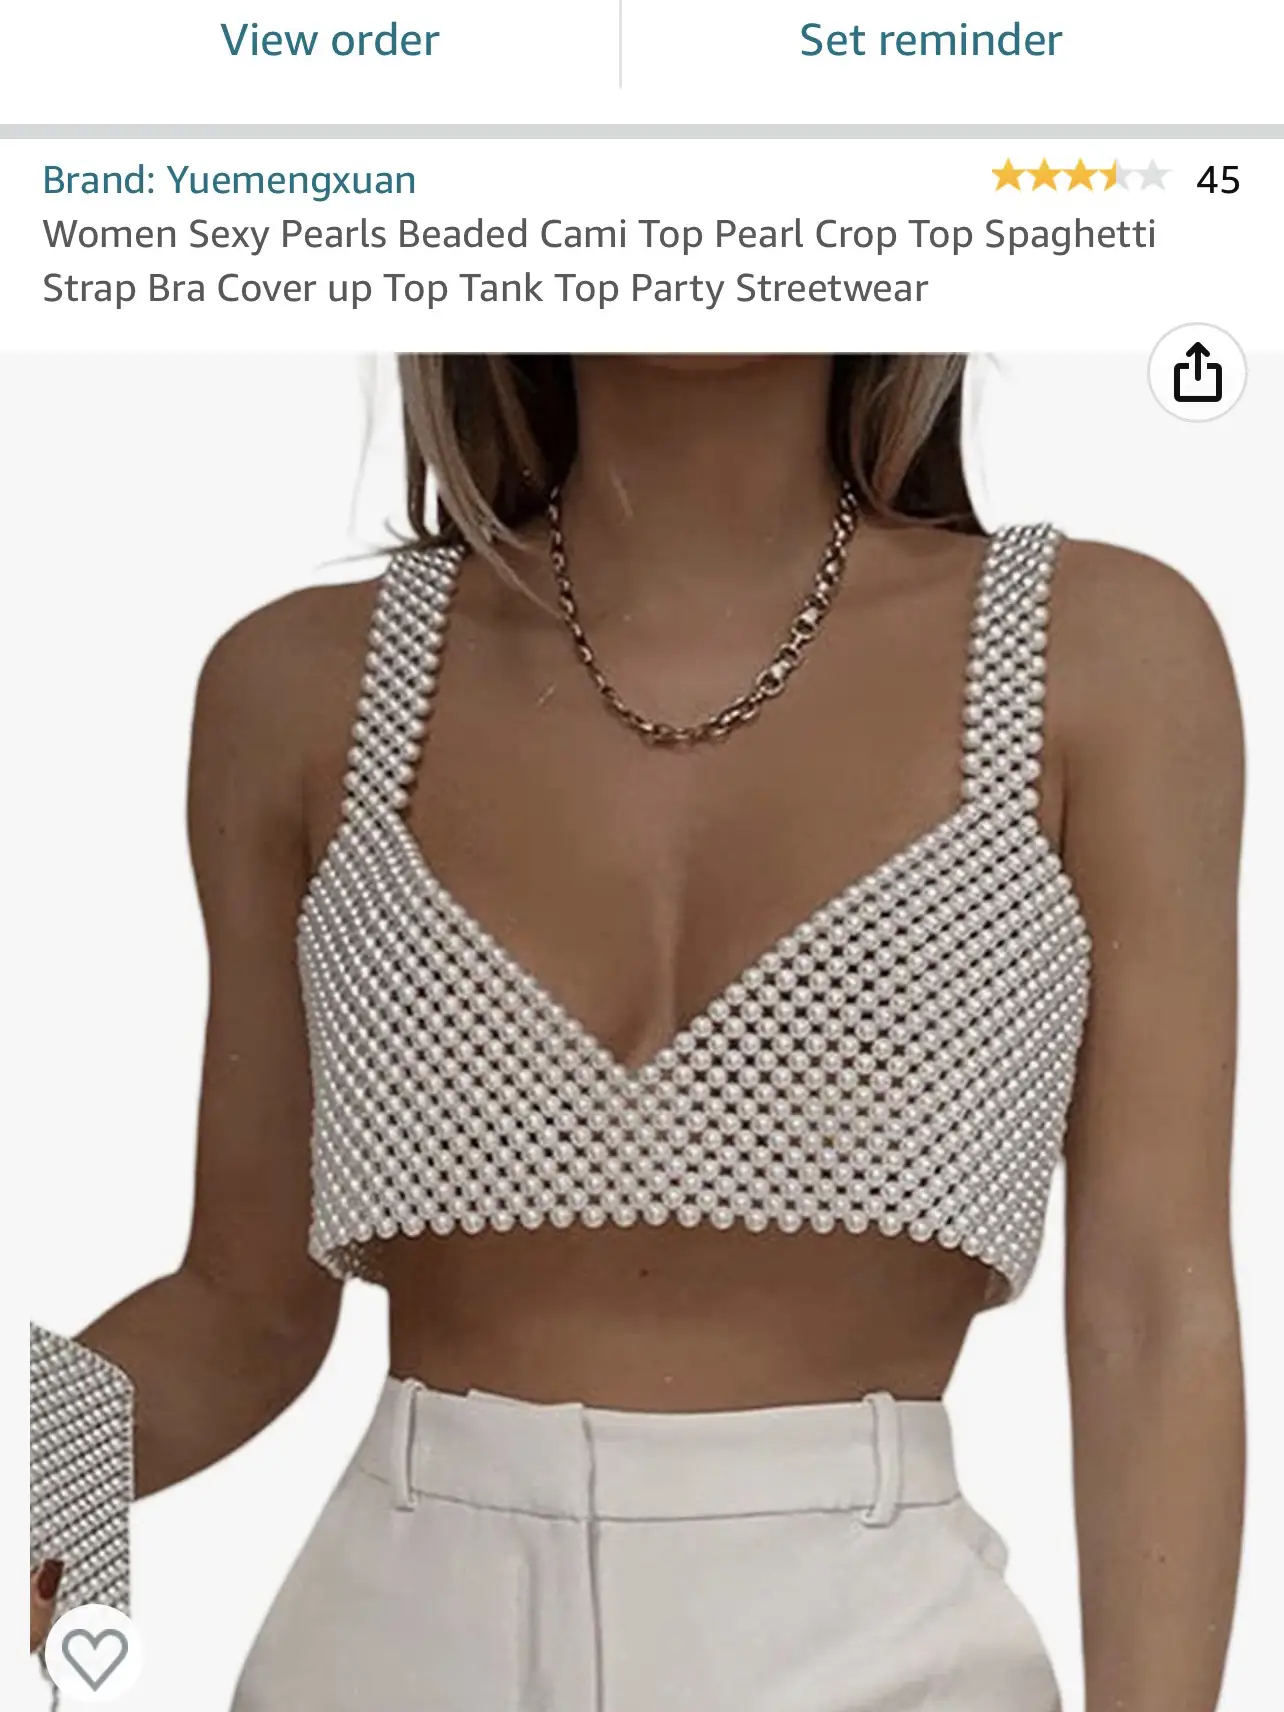 Women Sexy Pearls Beaded Cami Top Pearl Crop Top Spaghetti Strap Bra Cover  up Top Tank Top Party Streetwear